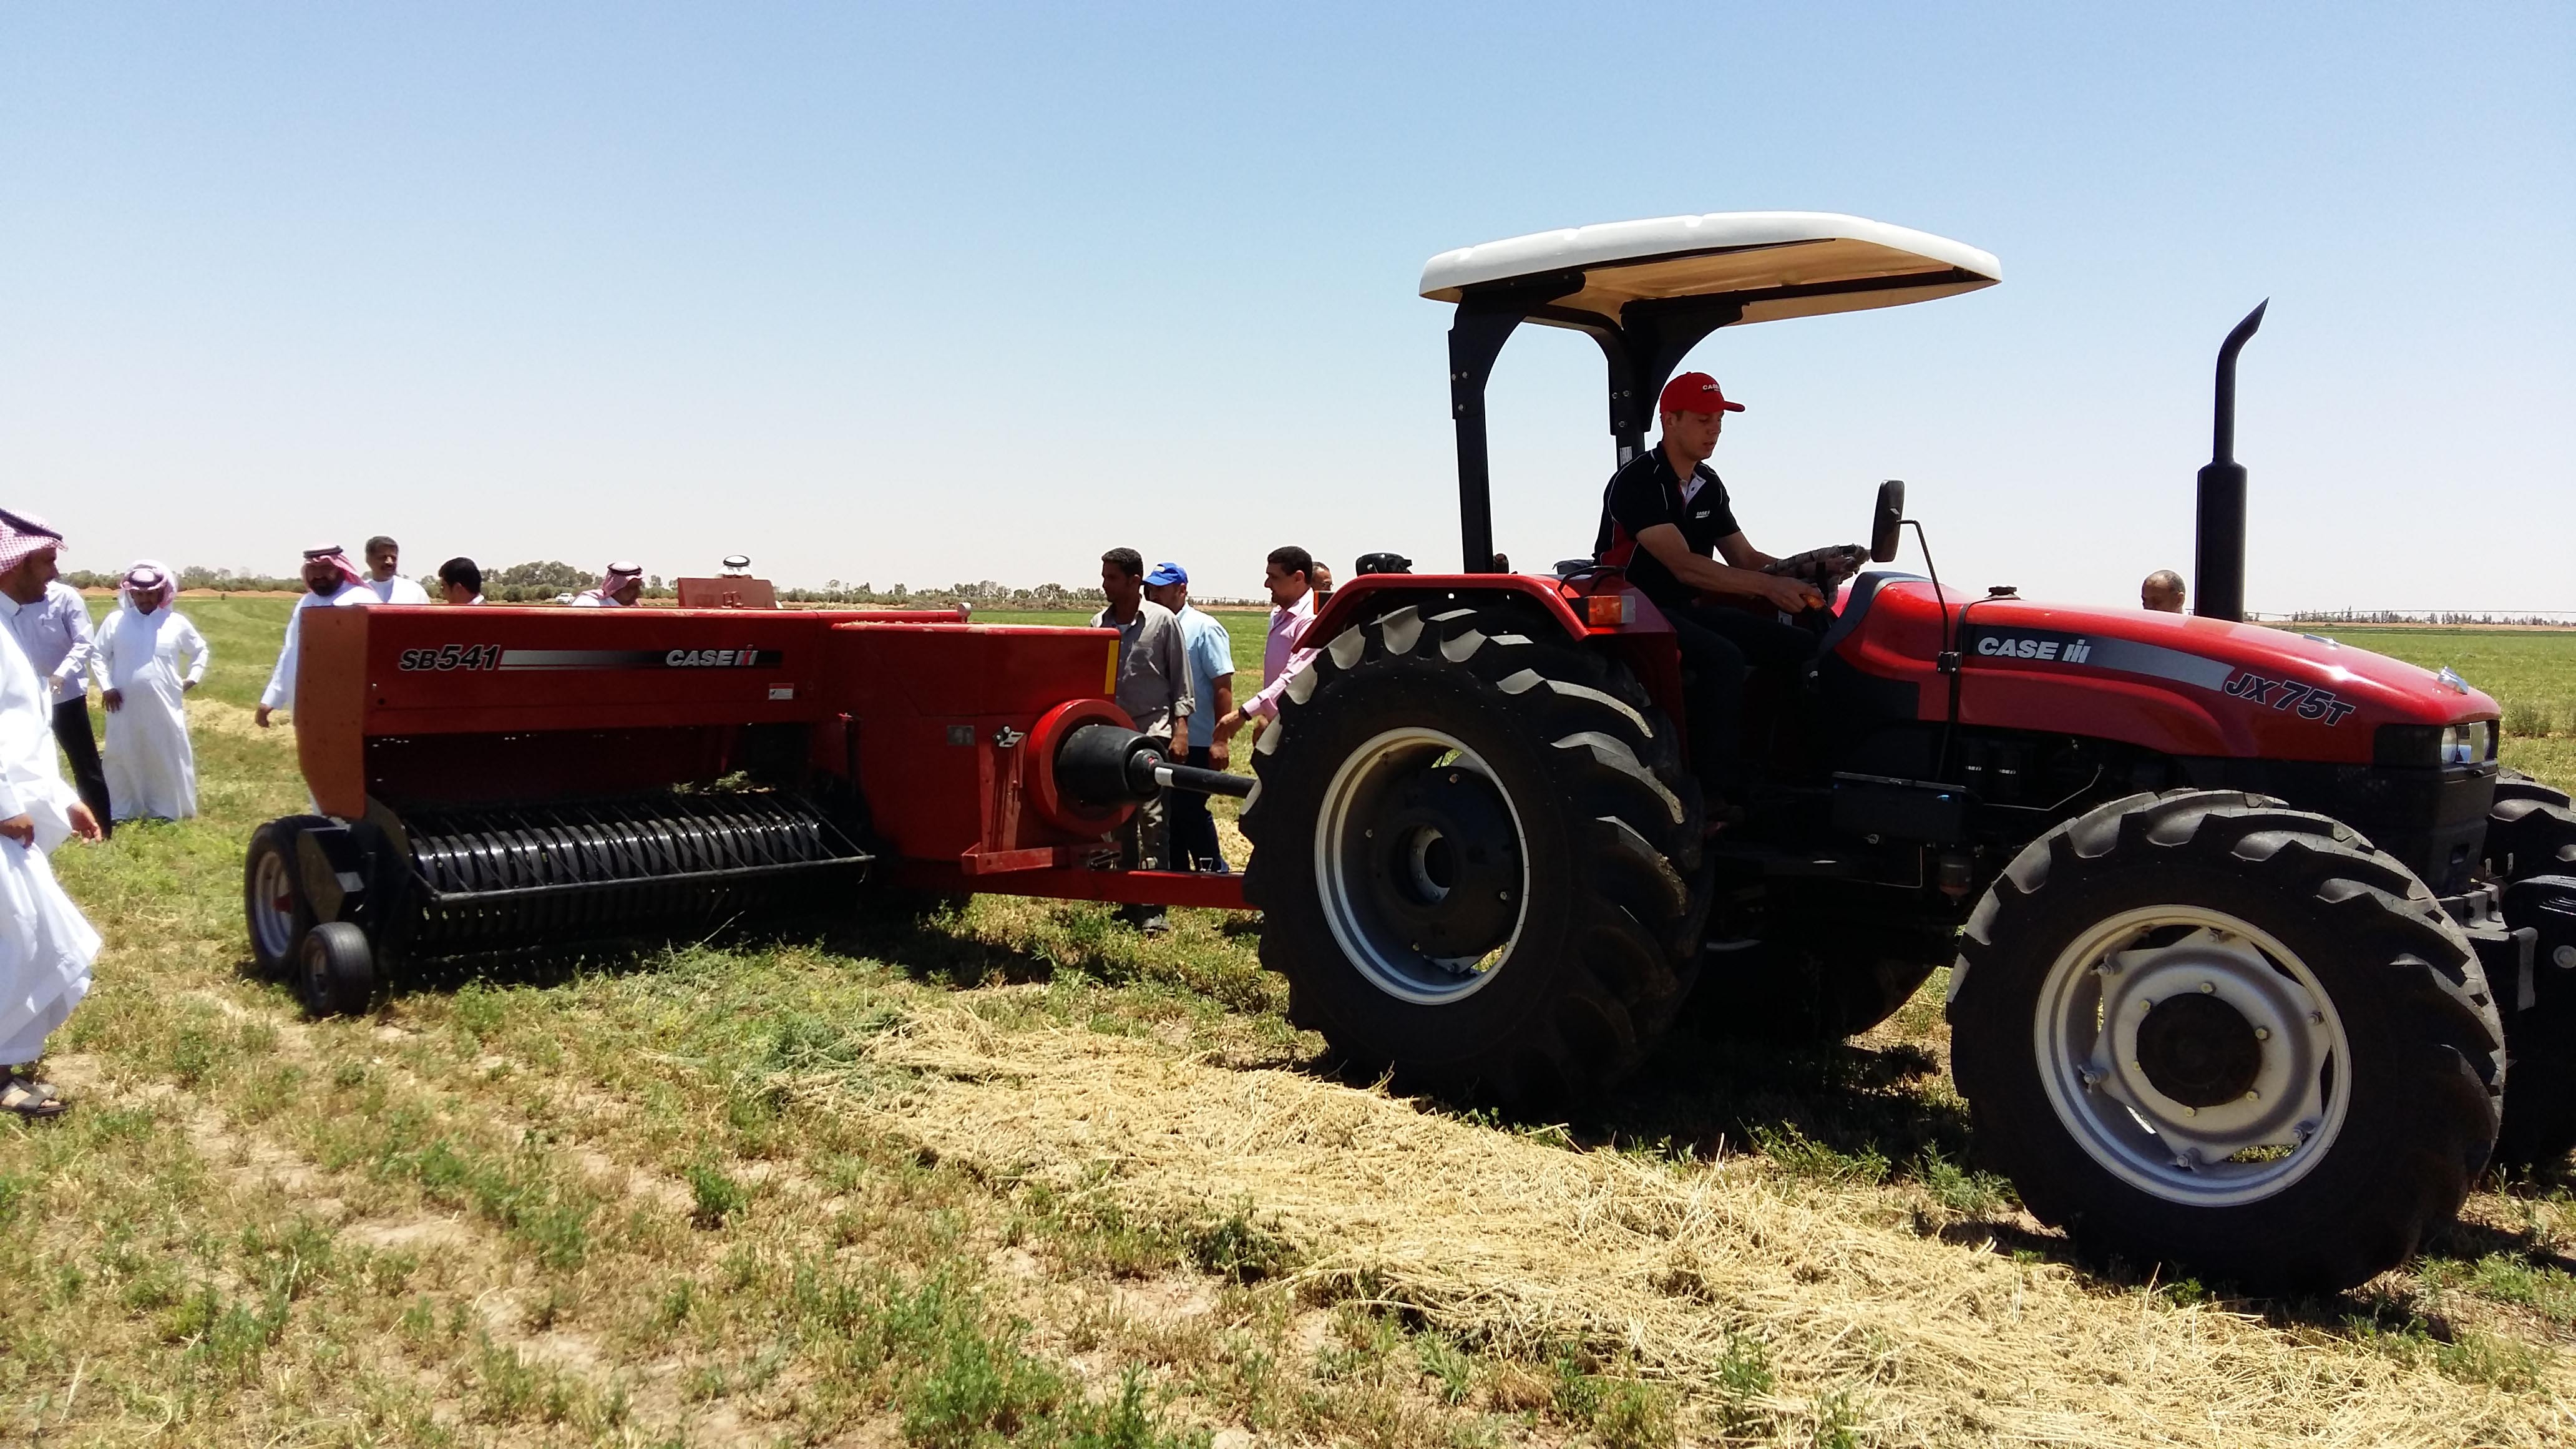 CASE IH HOLDS TRAINING EVENTS FOR MIDDLE EASTERN SALESPEOPLE AND CUSTOMERS (ME VERSION)